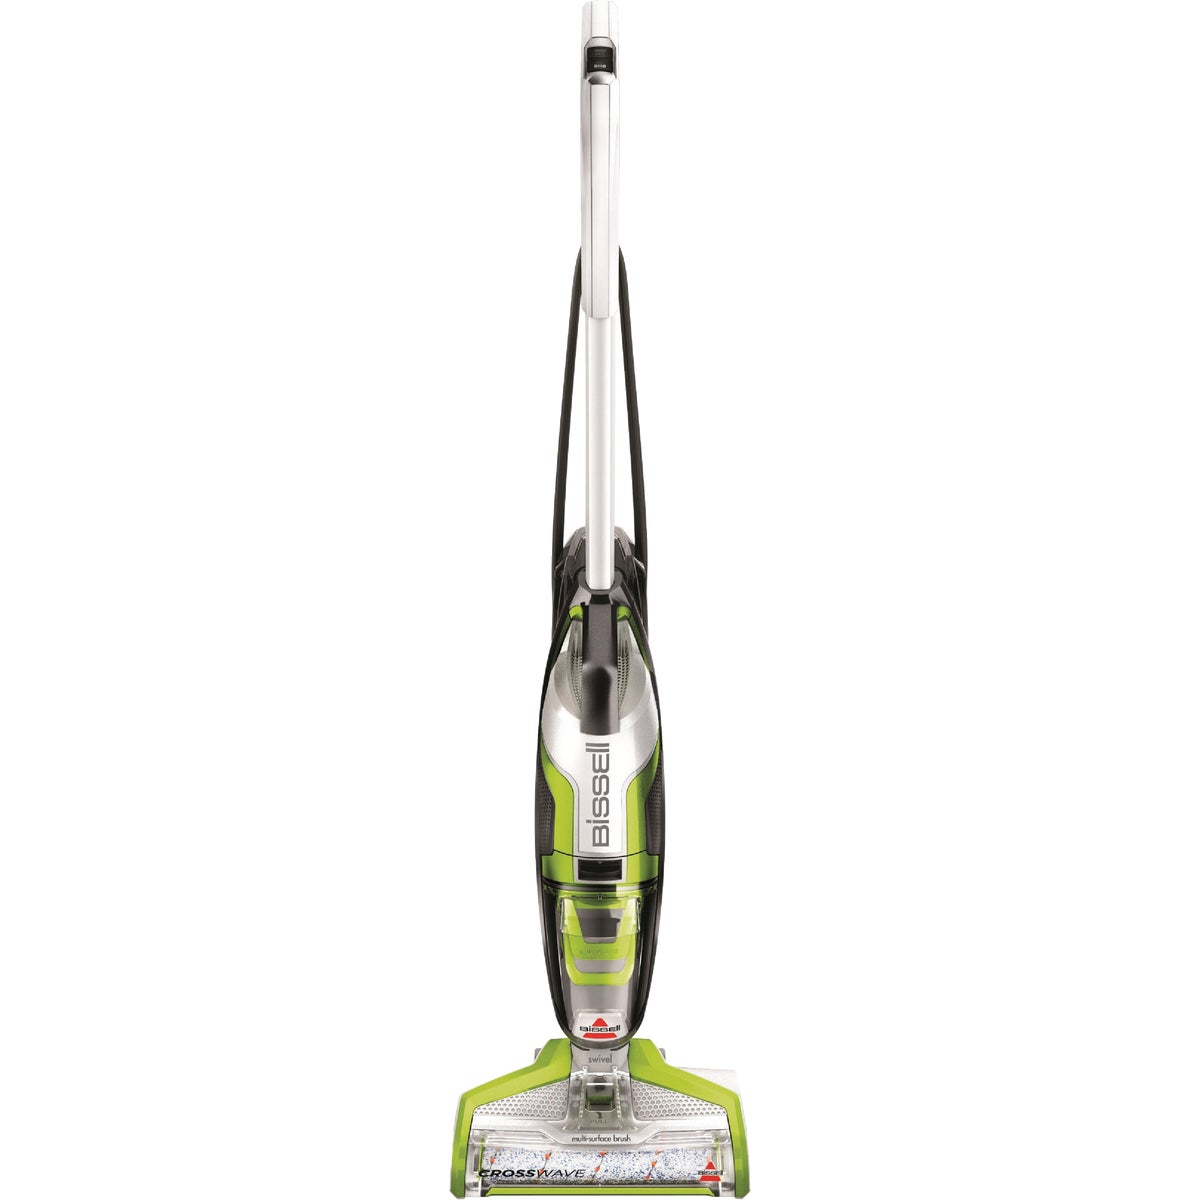 Item 602568, Vacuums and washes floors at the same time with the all-in-one Bissell 